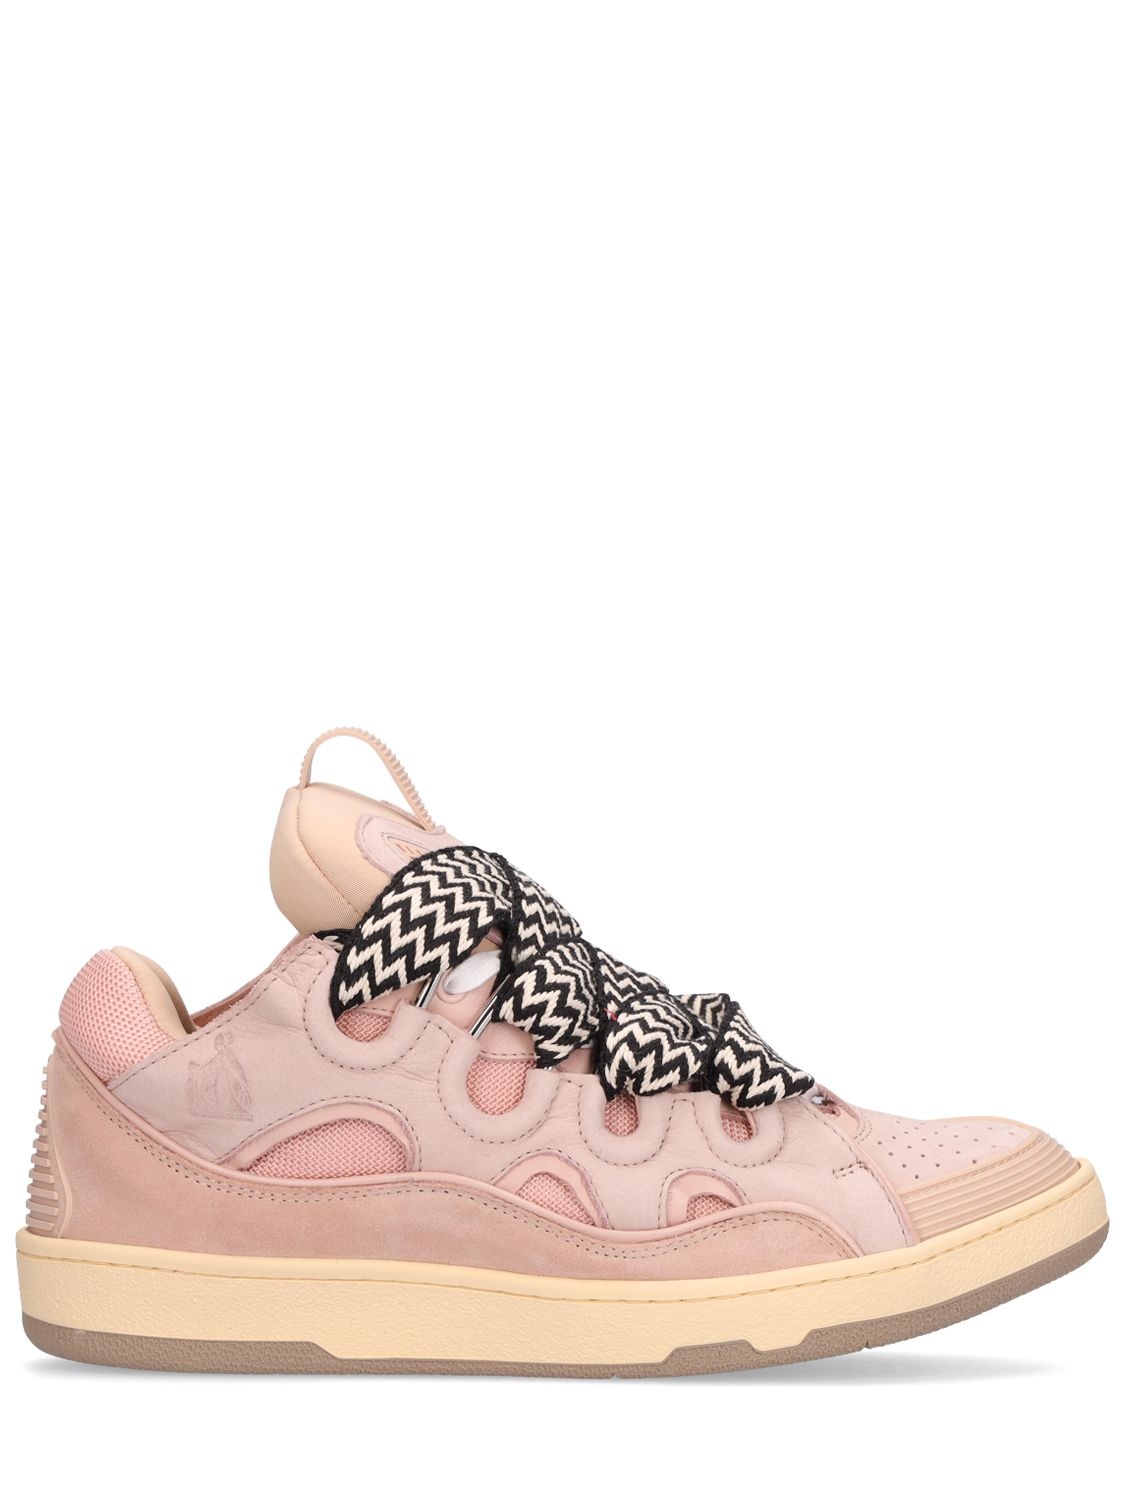 Lanvin Curb Leather Sneakers In Light Pink